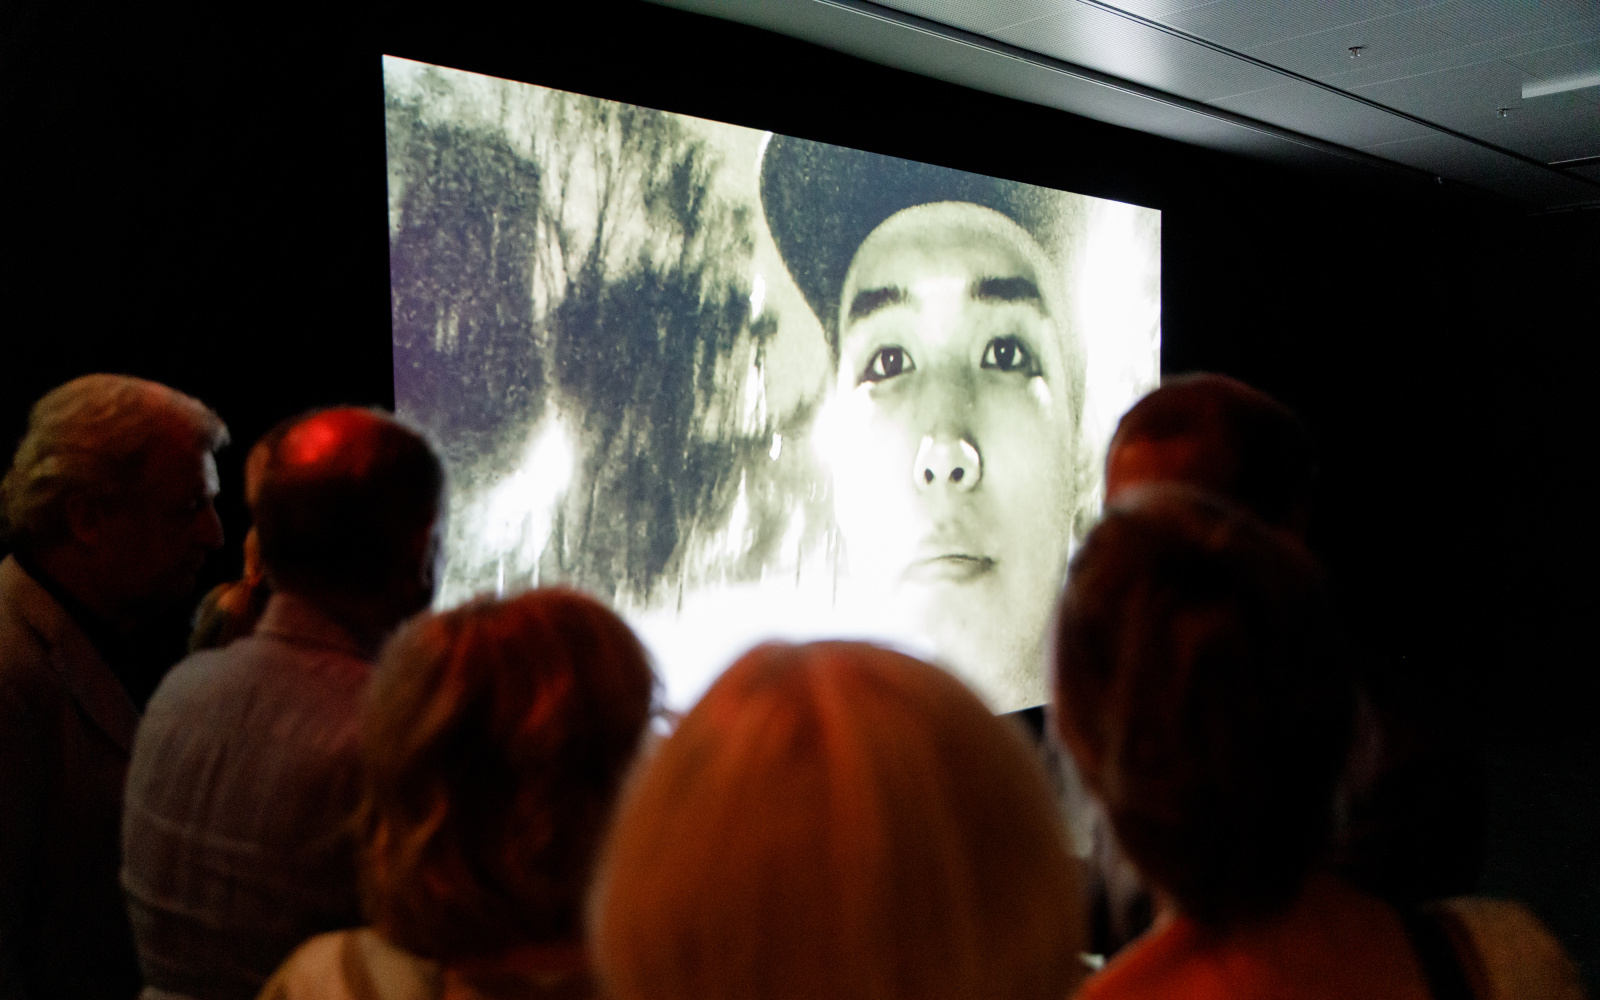 The picture shows a crowd in front of a huge screen showing an Asian young man with Cappy.